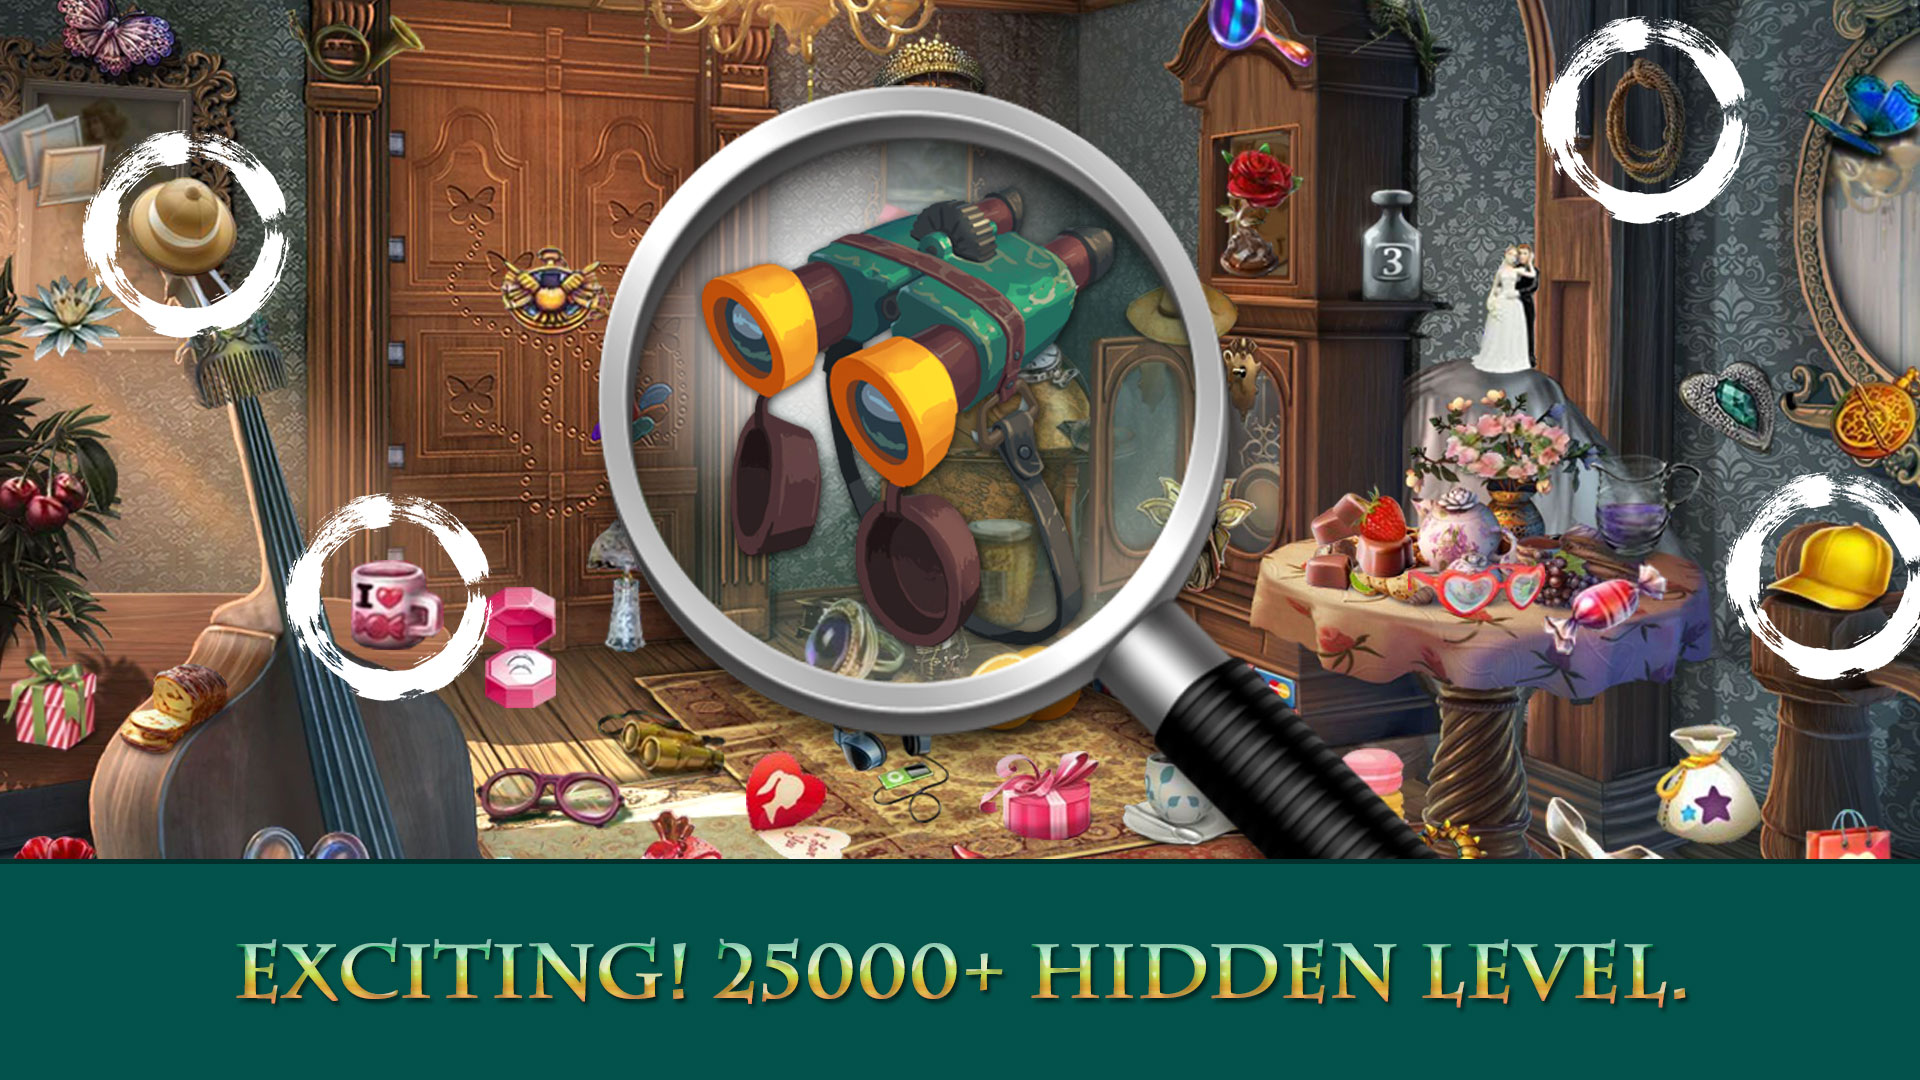 10 best hidden object games for Android - Android Authority